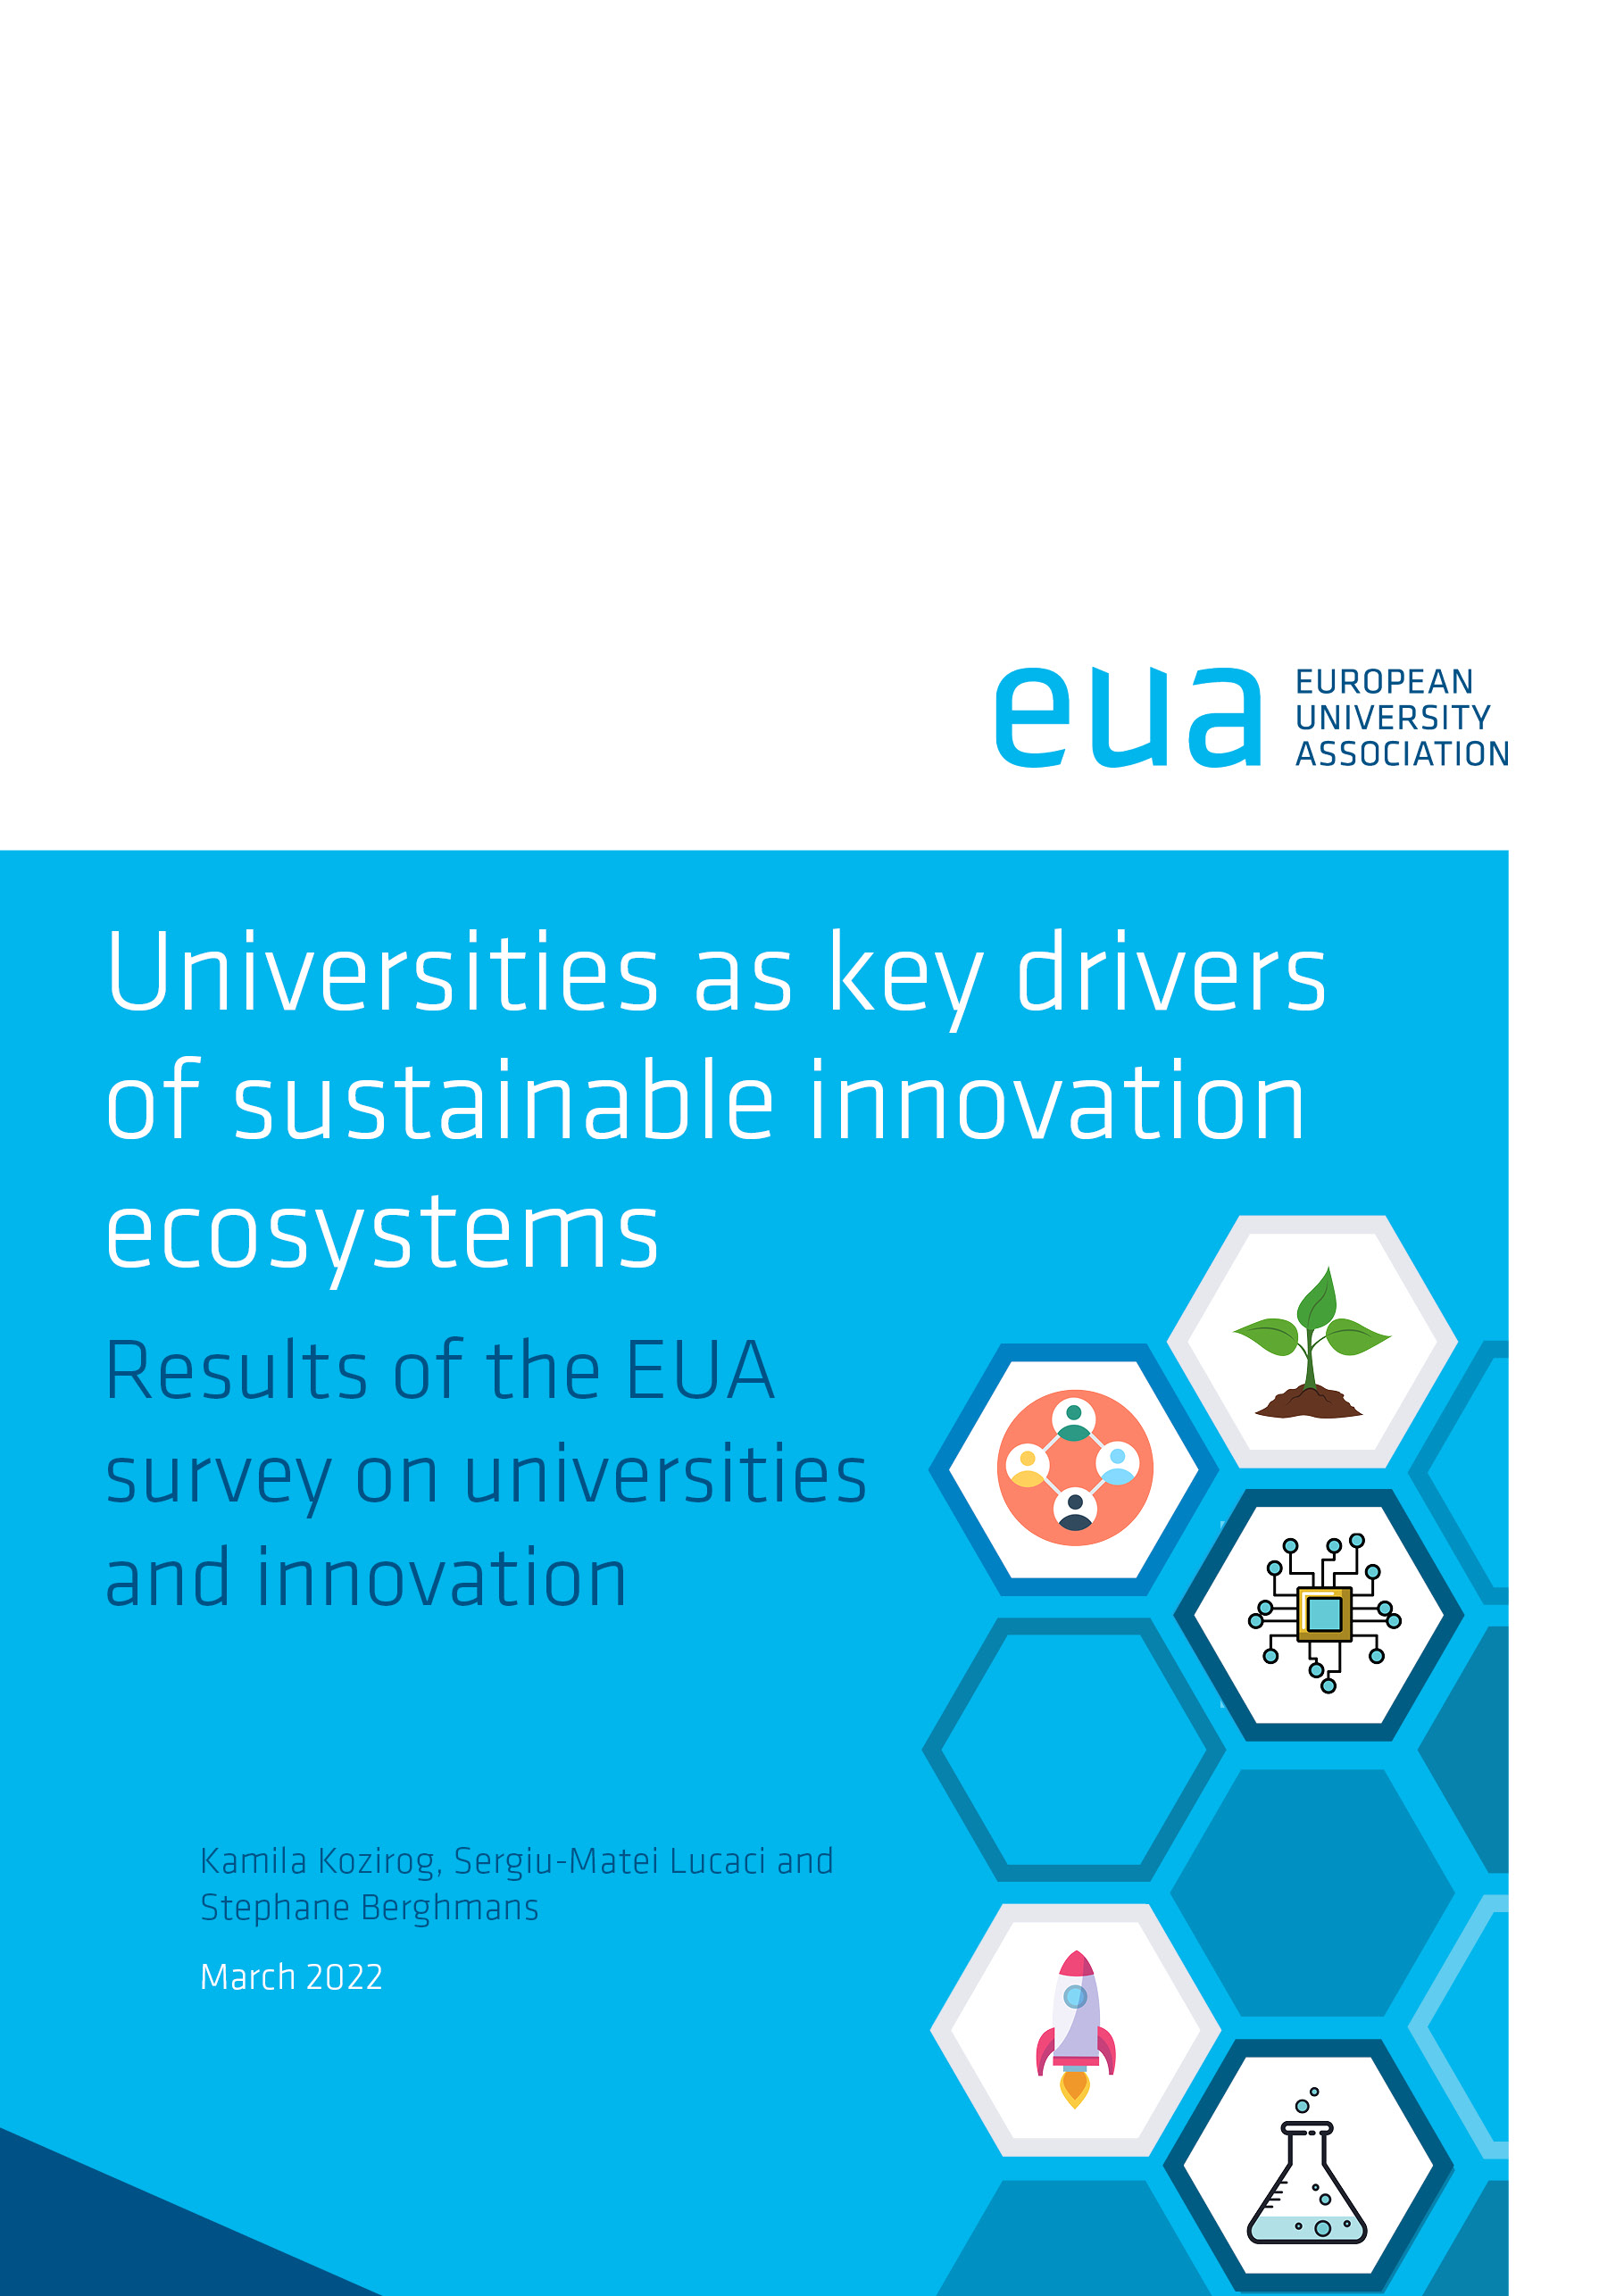 Universities as key drivers of sustainable innovation ecosystems